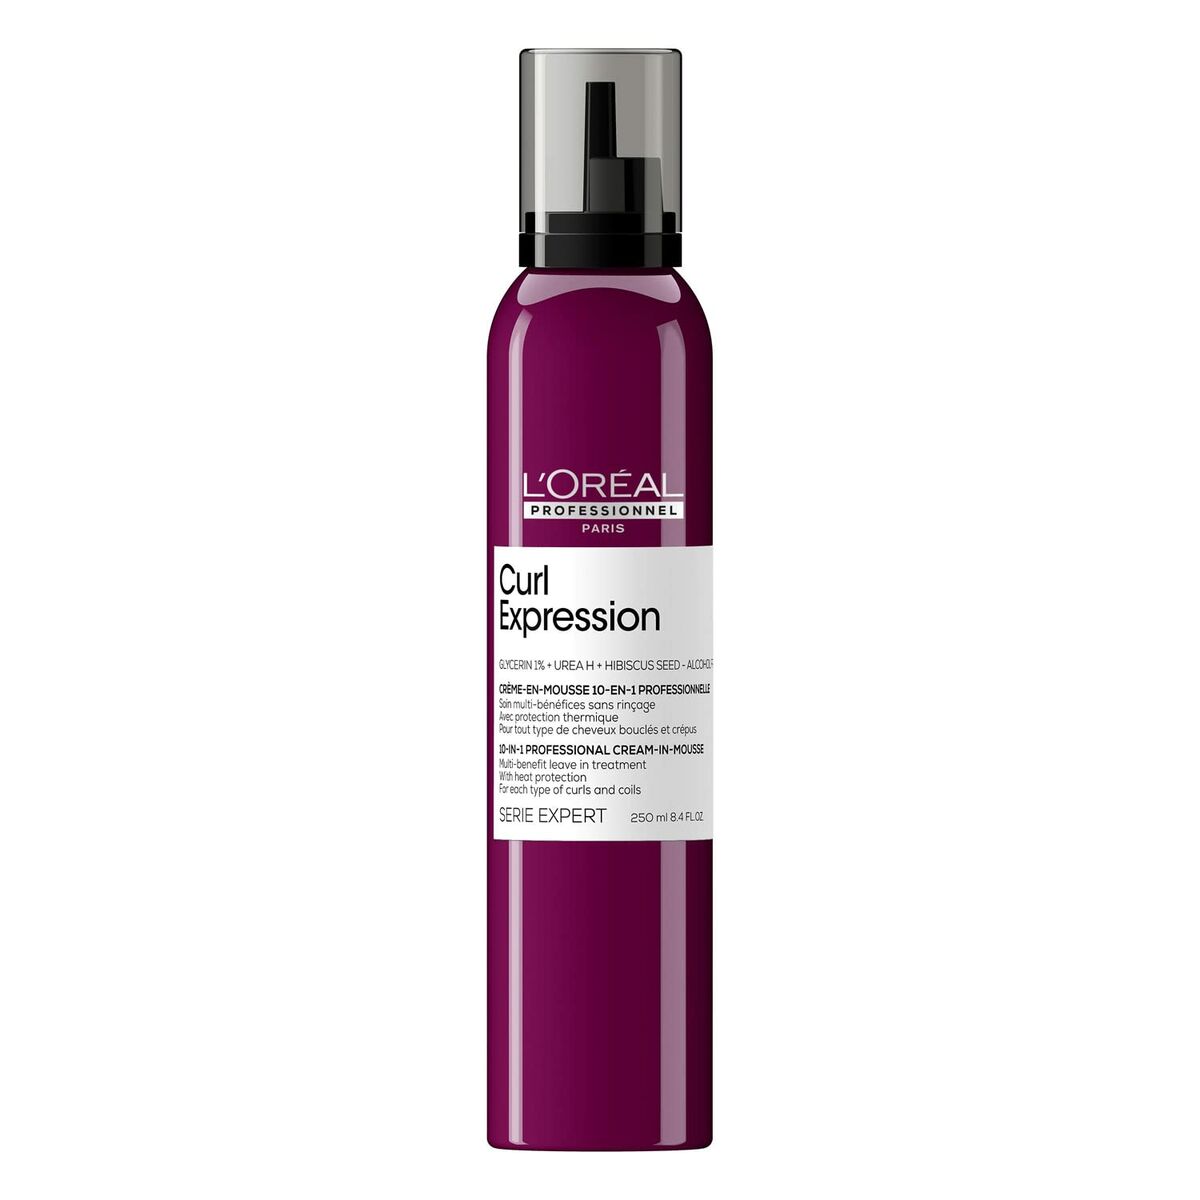 Reconstructive Mousse L'Oreal Professionnel Paris Curl Expression Multifunction Curly Hair 10-in-1 (230 ml)-0